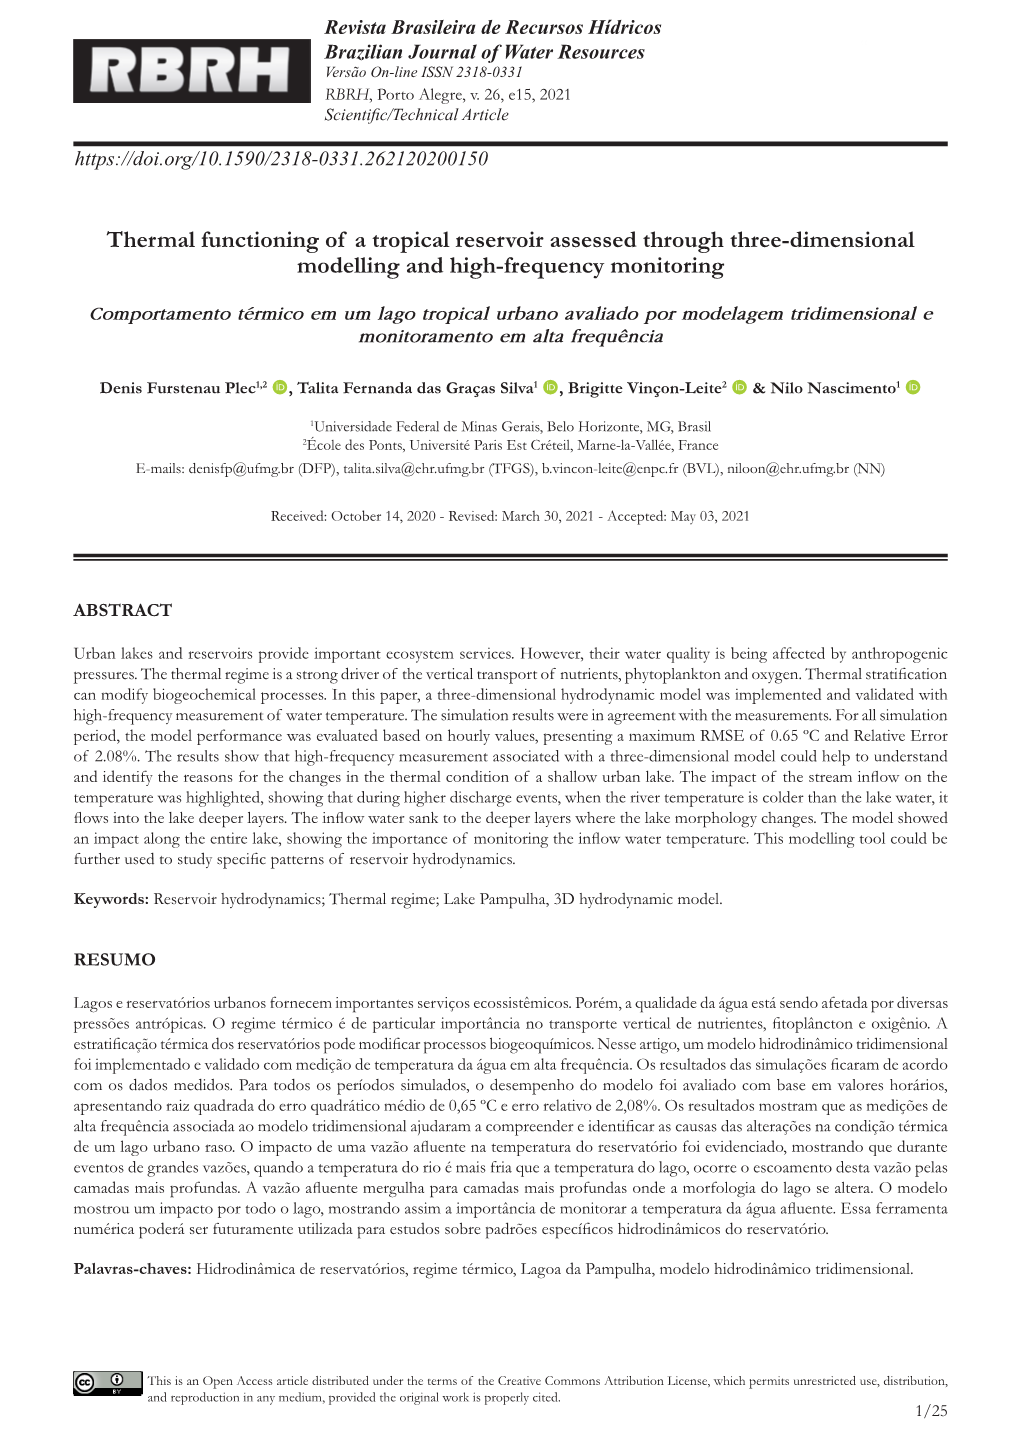 Thermal Functioning of a Tropical Reservoir Assessed Through Three-Dimensional Modelling and High-Frequency Monitoring